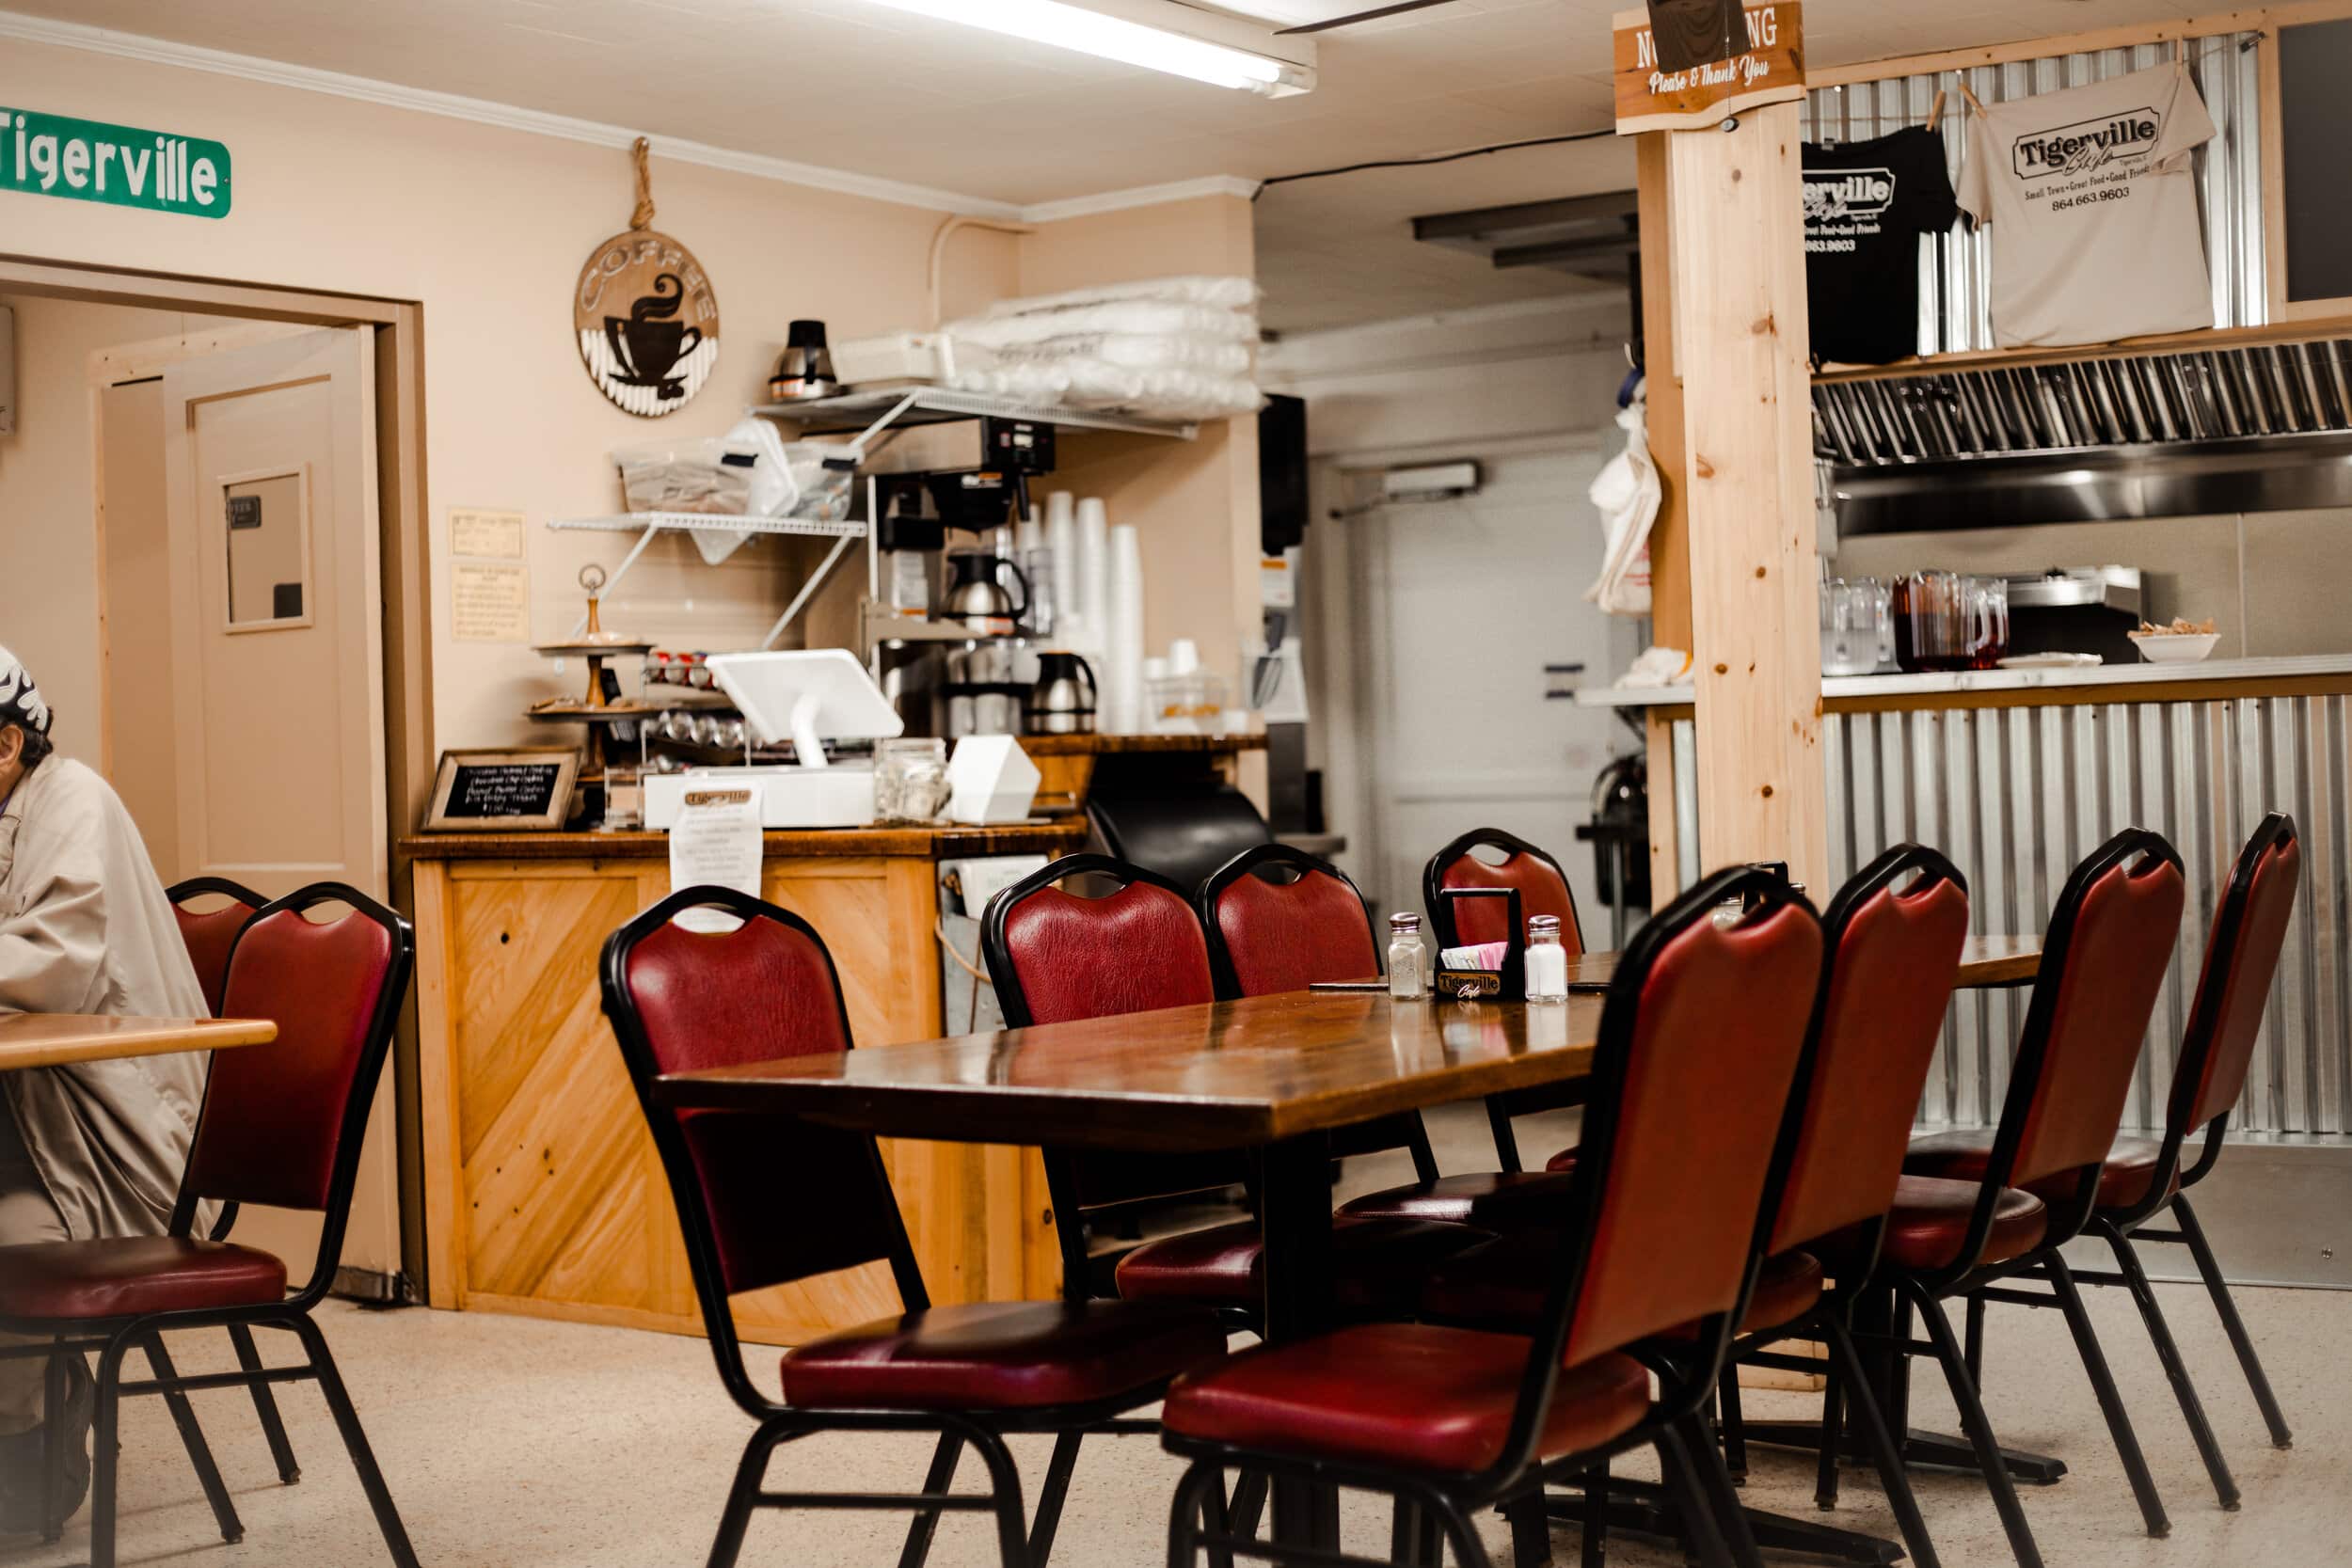 Heres a look inside.  The cafe offers a warm, cozy atmosphere with a quaint, southern aesthetic.